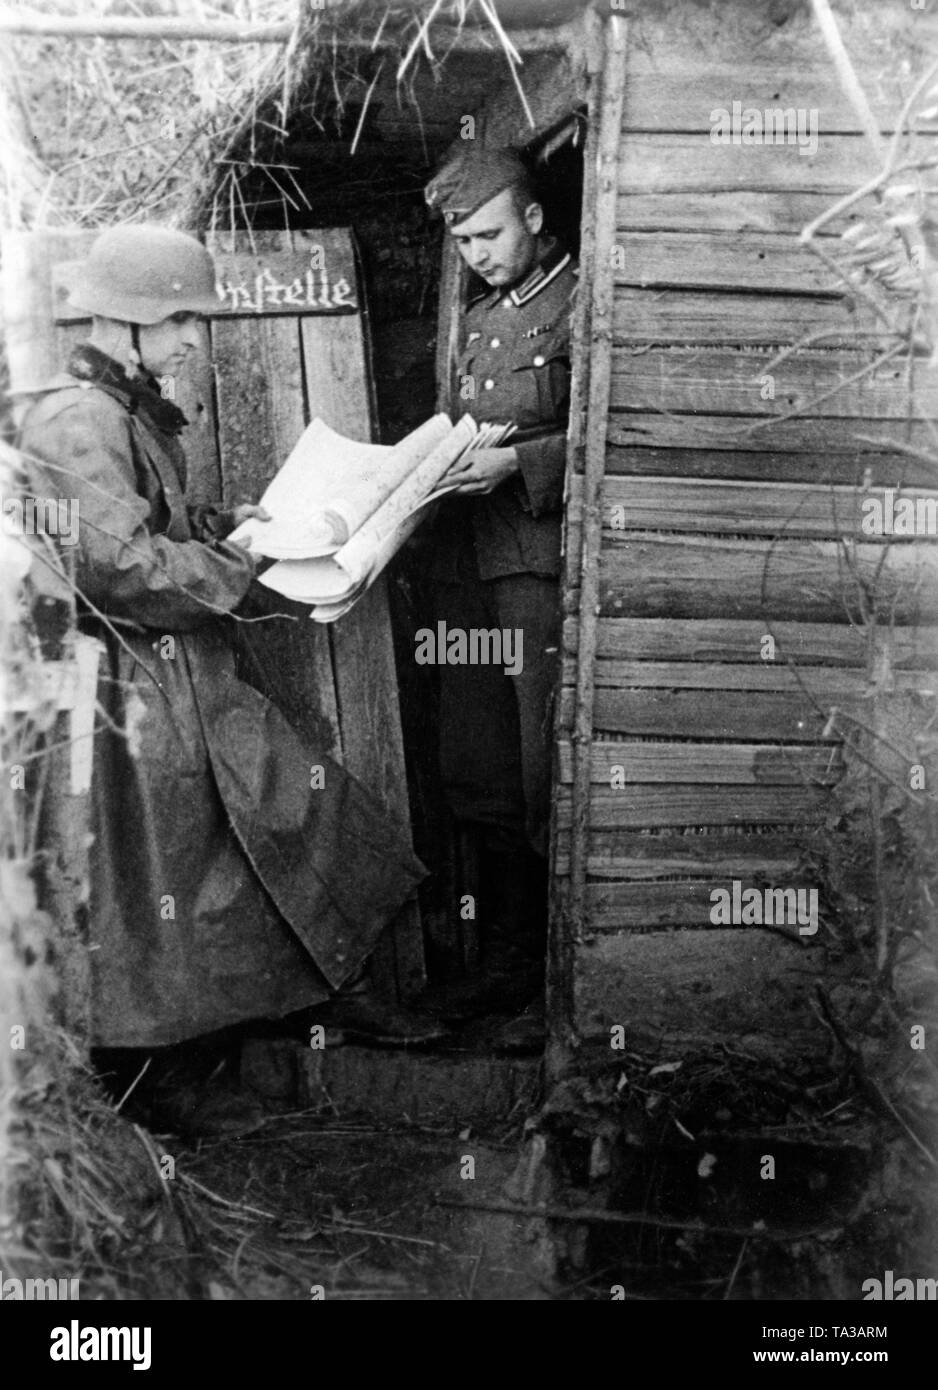 A dispatch rider brings reconnaissance results to the map unit. They are probably soldiers of the Army Group Center during the Battle of Moscow. Photo: war correspondent Sepp Jaeger. Stock Photo